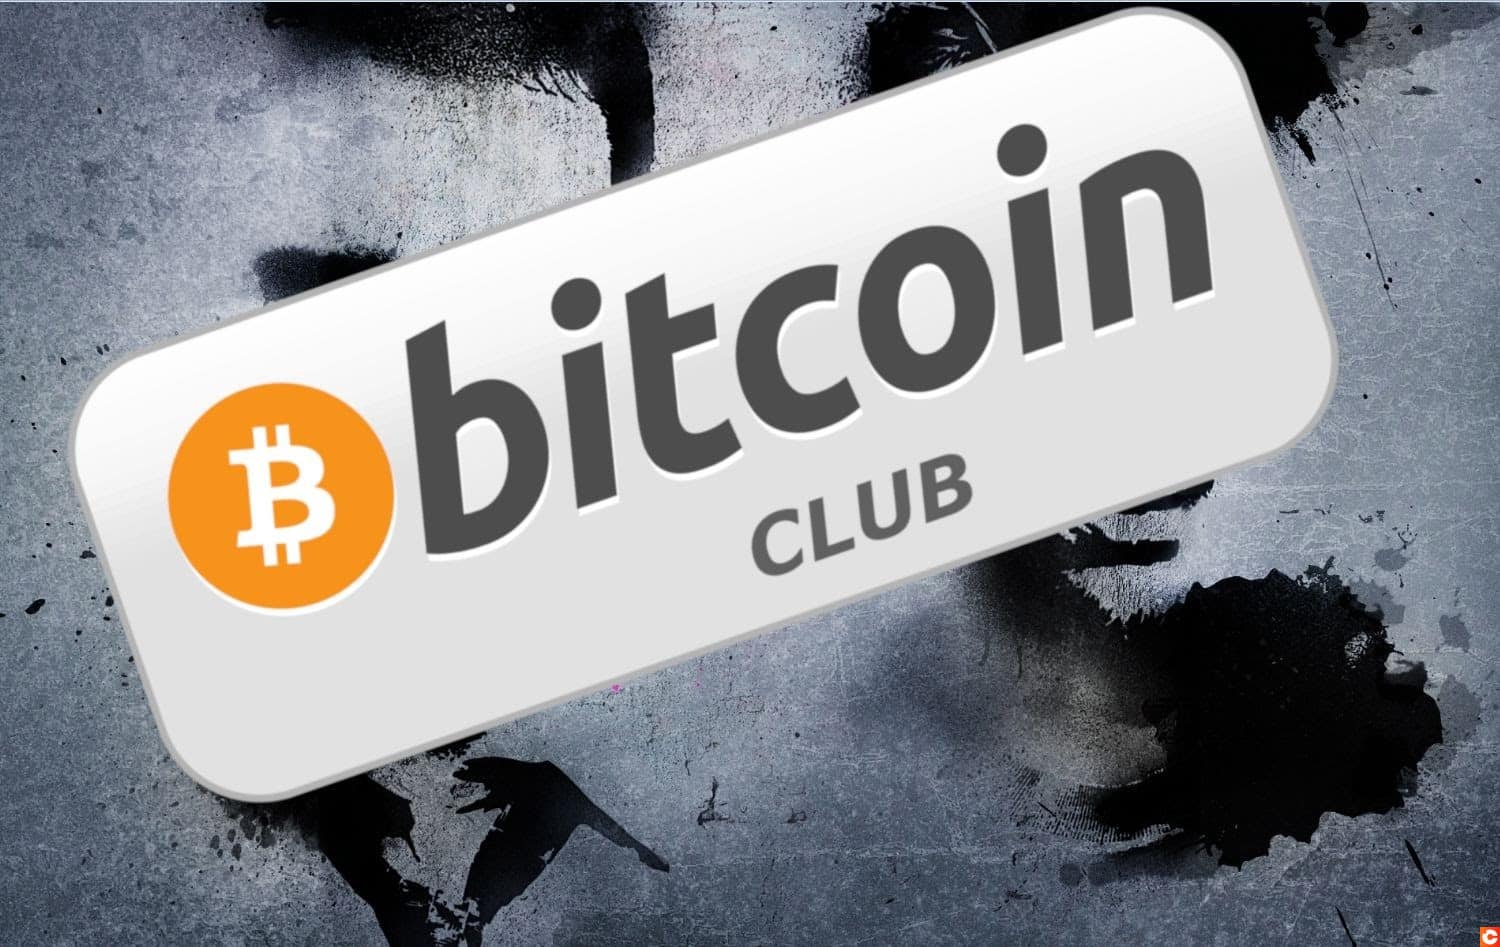 Ladies and Gentlemen, Welcome to the Bitcoin Club: Eight Rules to Remember